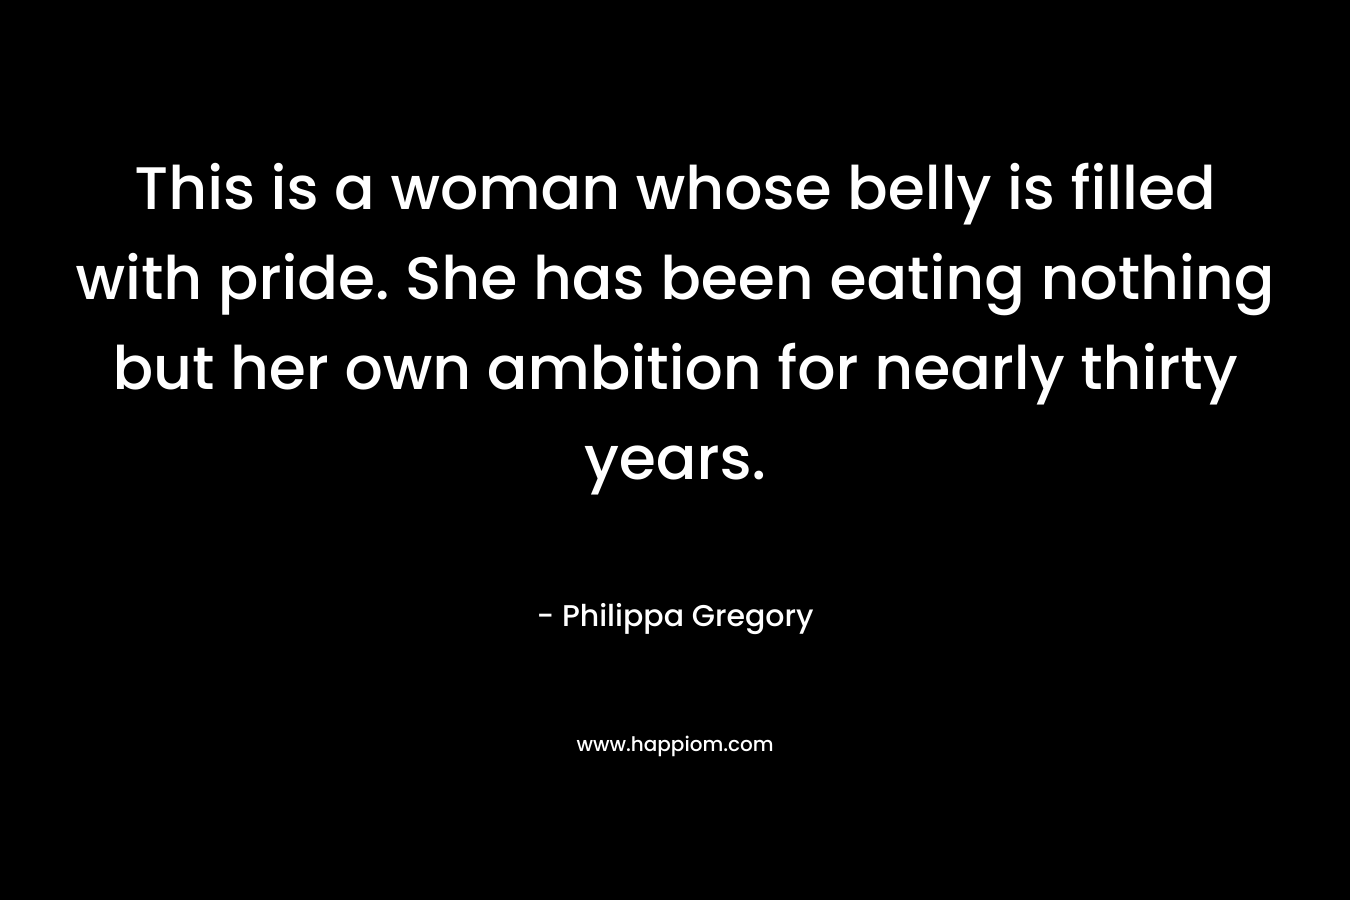 This is a woman whose belly is filled with pride. She has been eating nothing but her own ambition for nearly thirty years. – Philippa Gregory